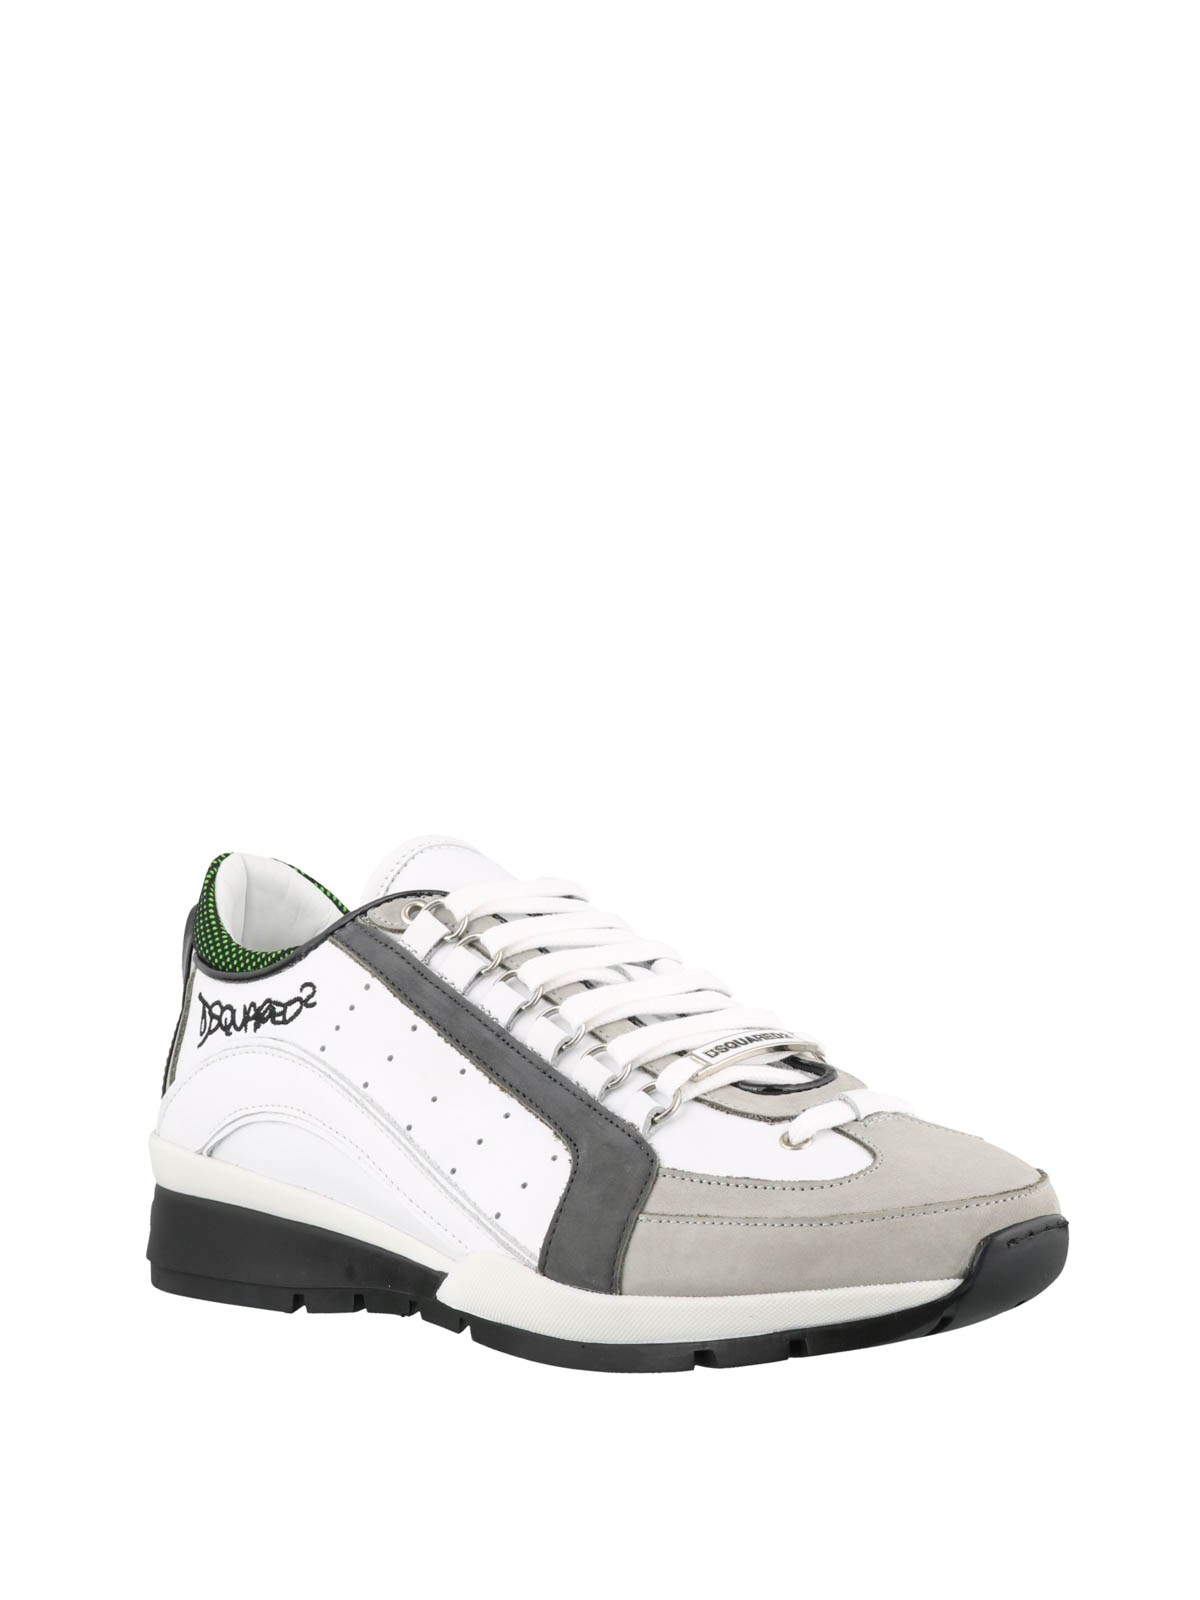 551 white and grey leather sneakers 